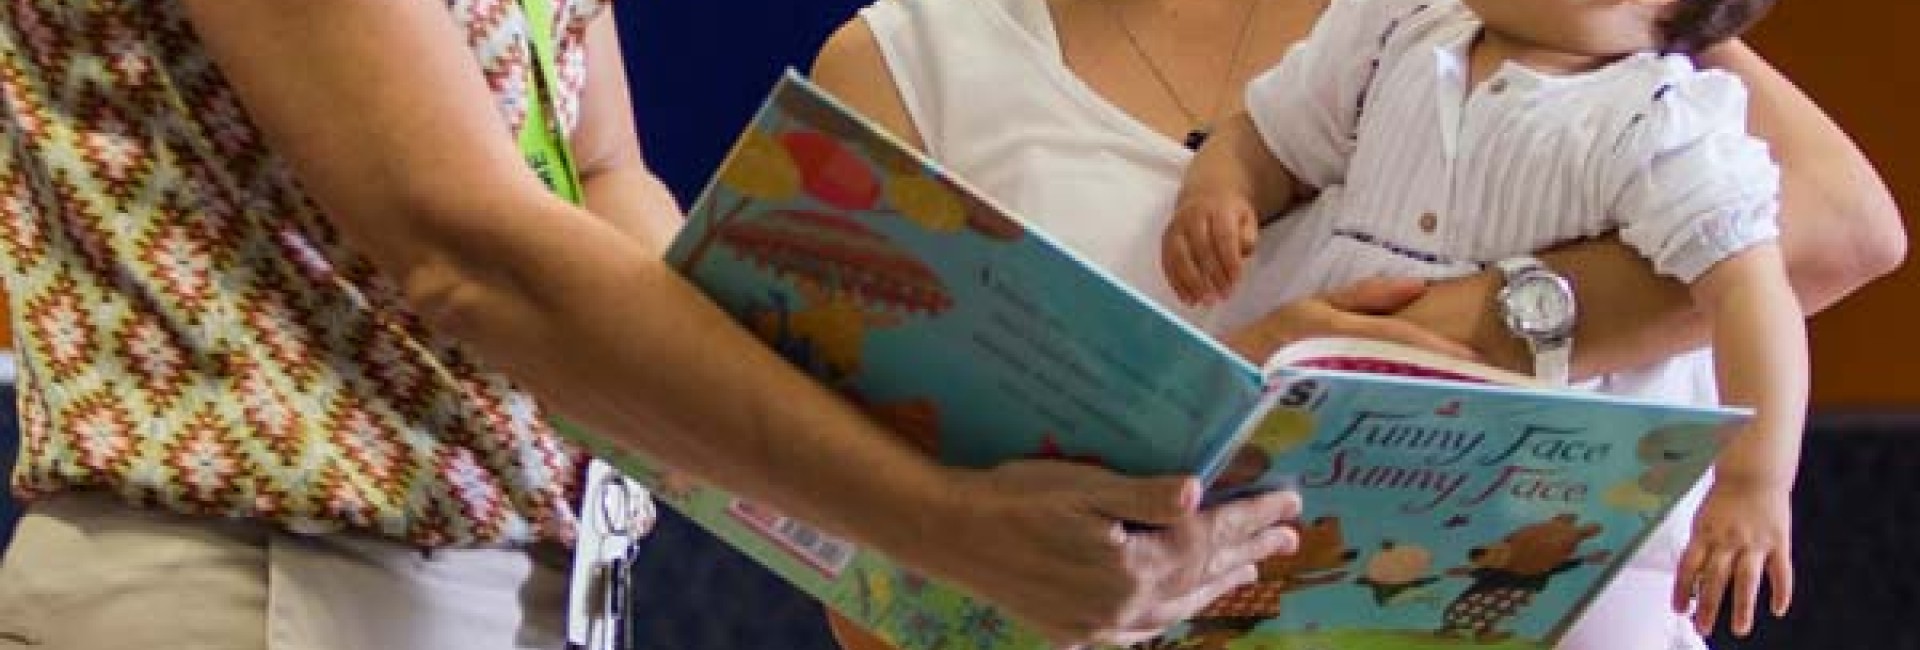 Woman and baby reading book with librarian